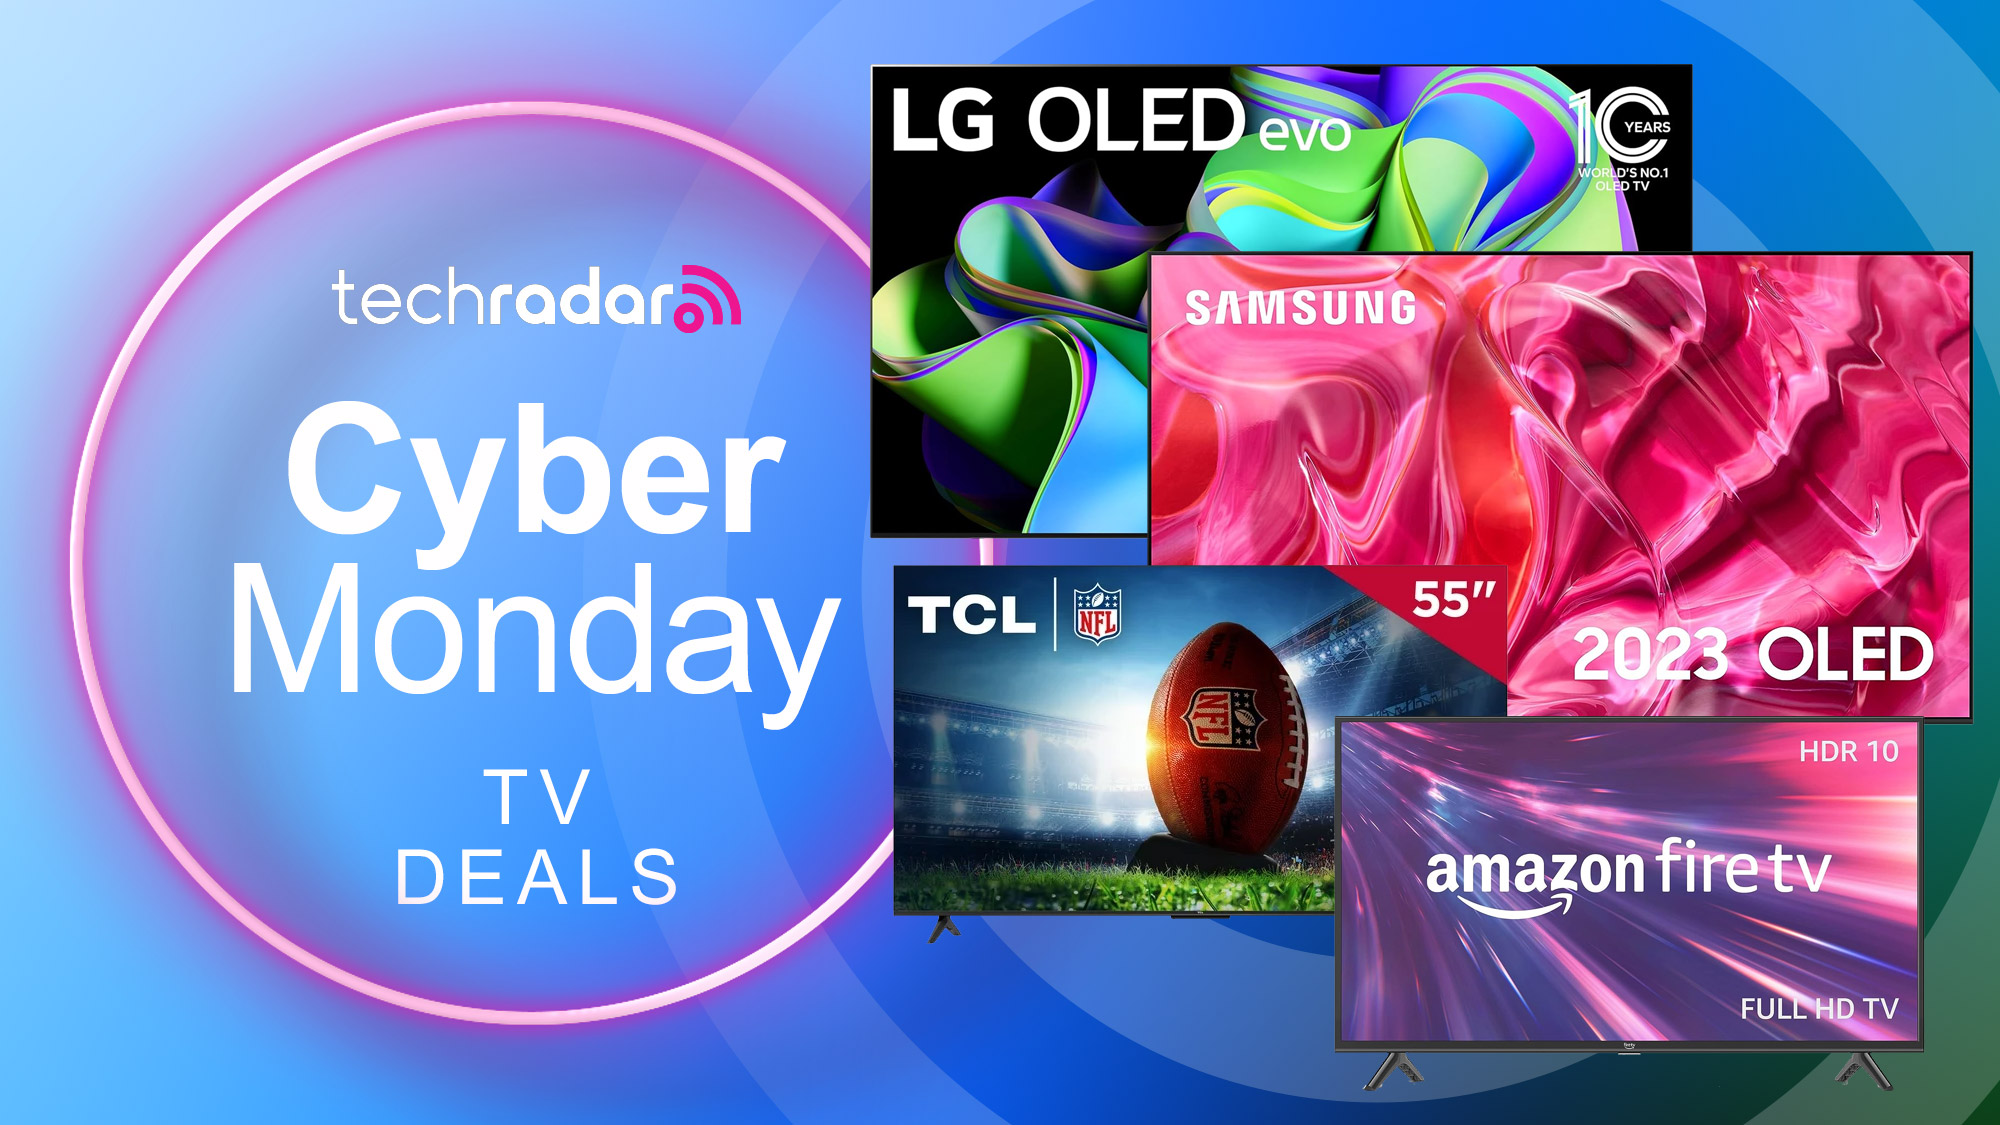 Buy 10 TVs, Get 1 Free for a Limited Time!